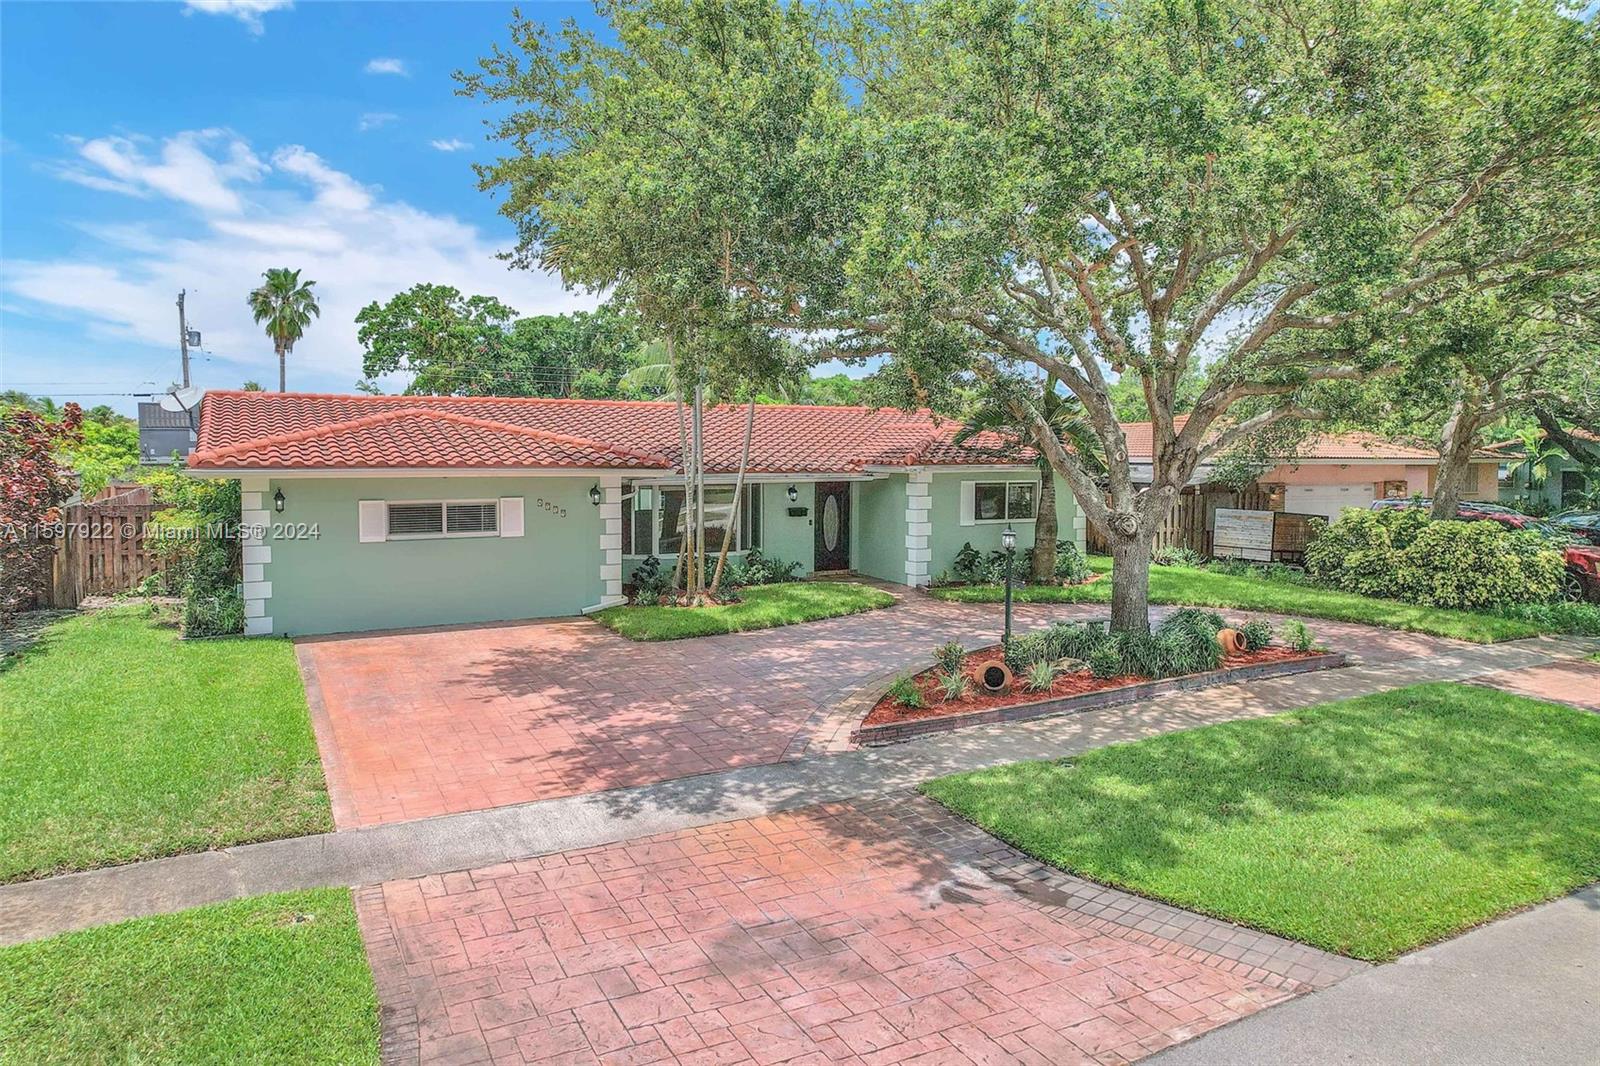 4719 Madison St St, Hollywood, Broward County, Florida - 5 Bedrooms  
2 Bathrooms - 